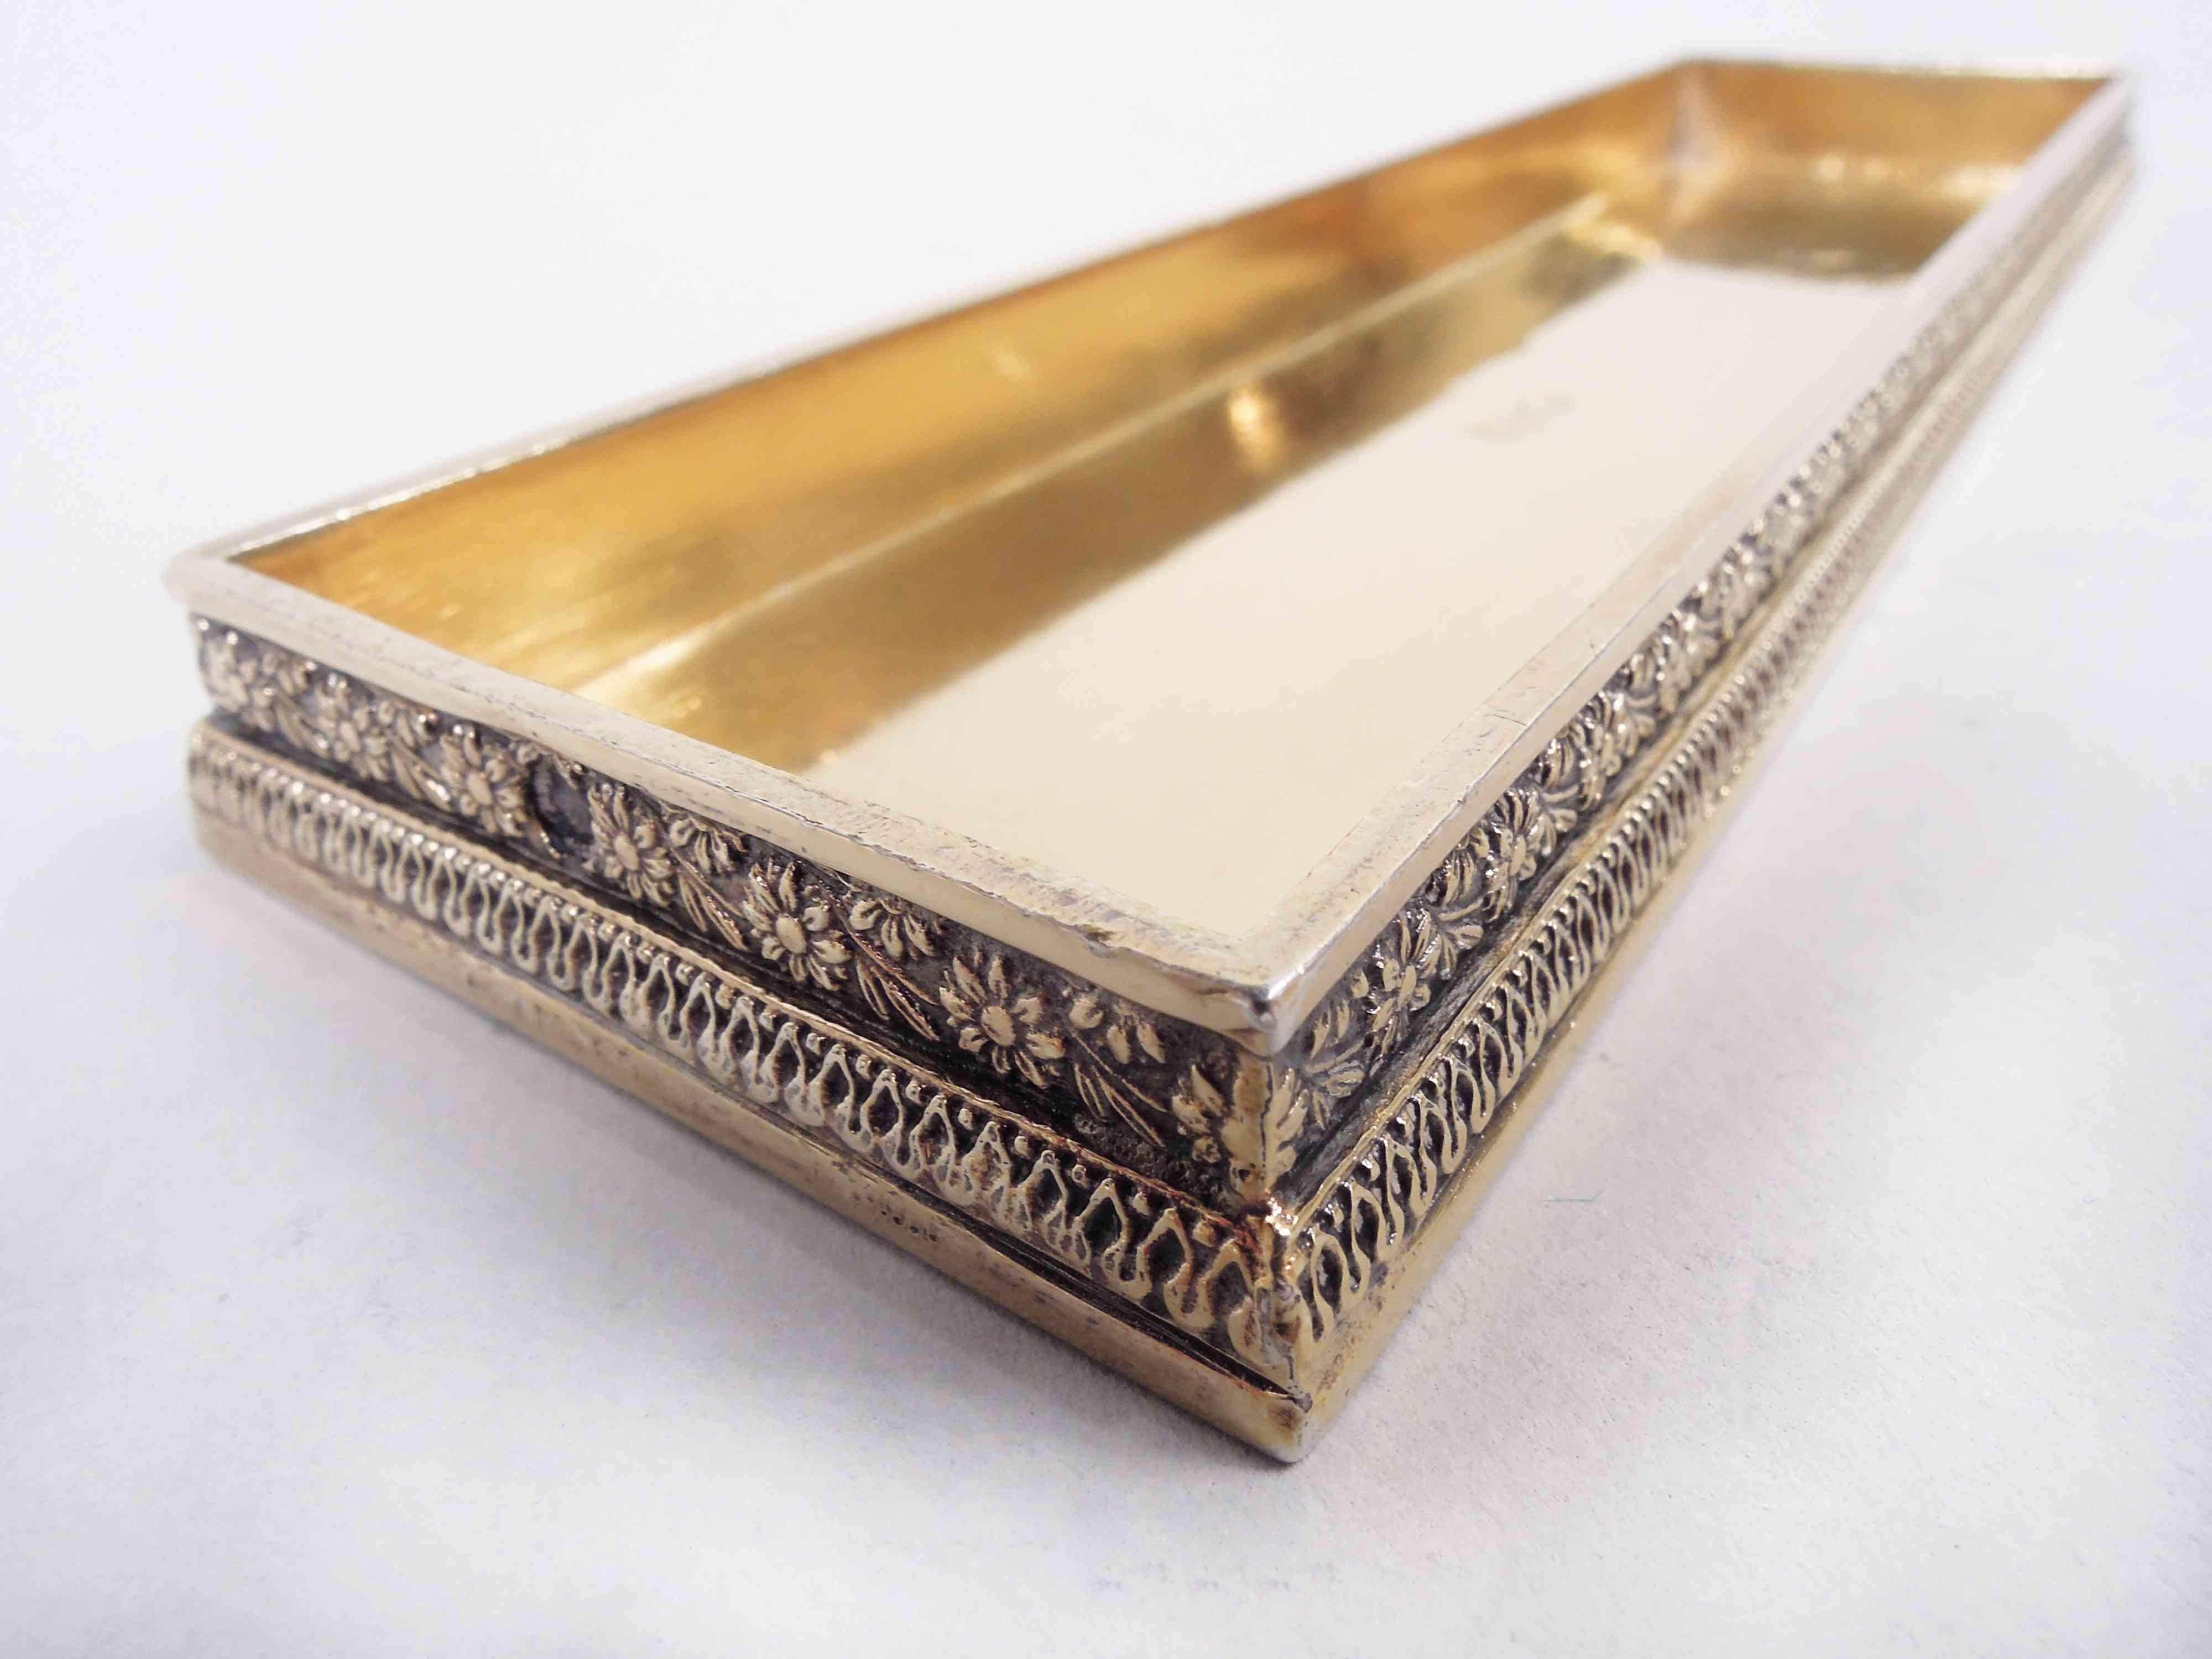 Odiot French Restauration Return of the Bourbons Silver Gilt Box For Sale 5